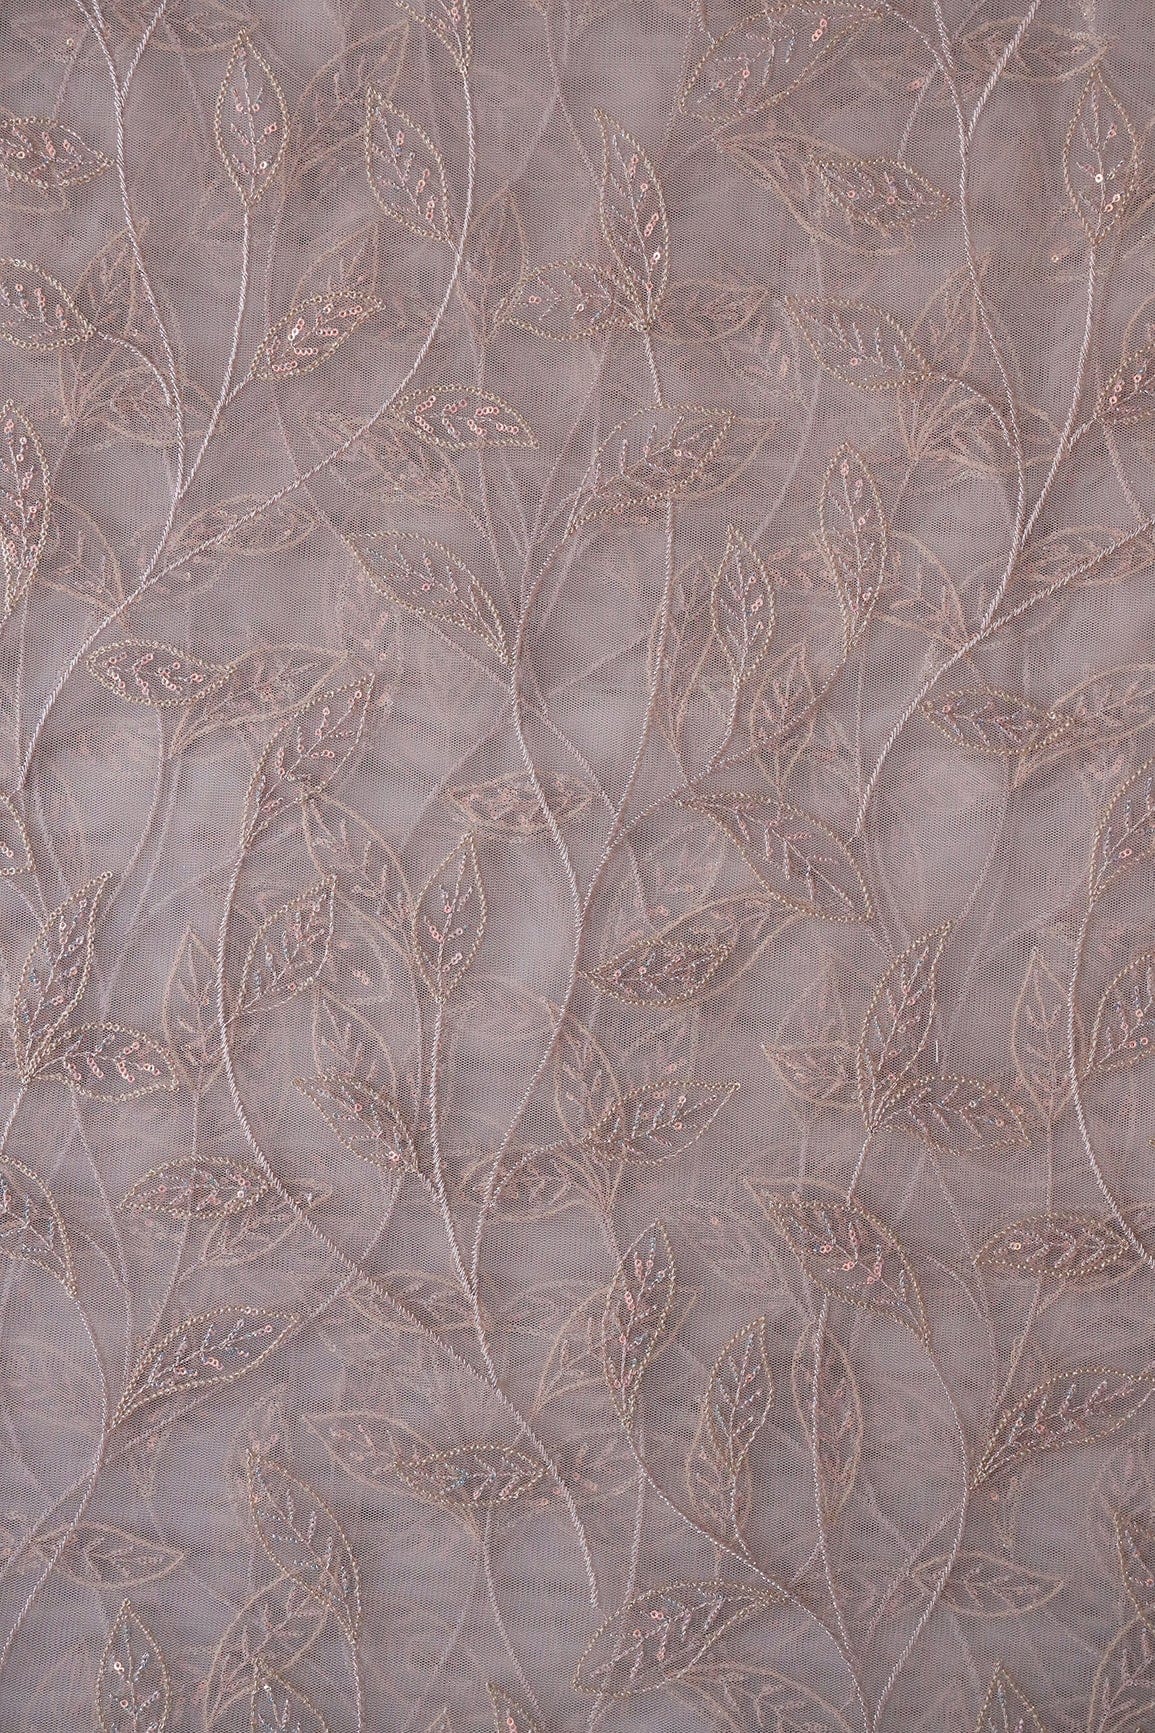 doeraa Embroidery Fabrics Grey Thread With Sequins Beautiful Leafy Embroidery On Grey Soft Net Fabric